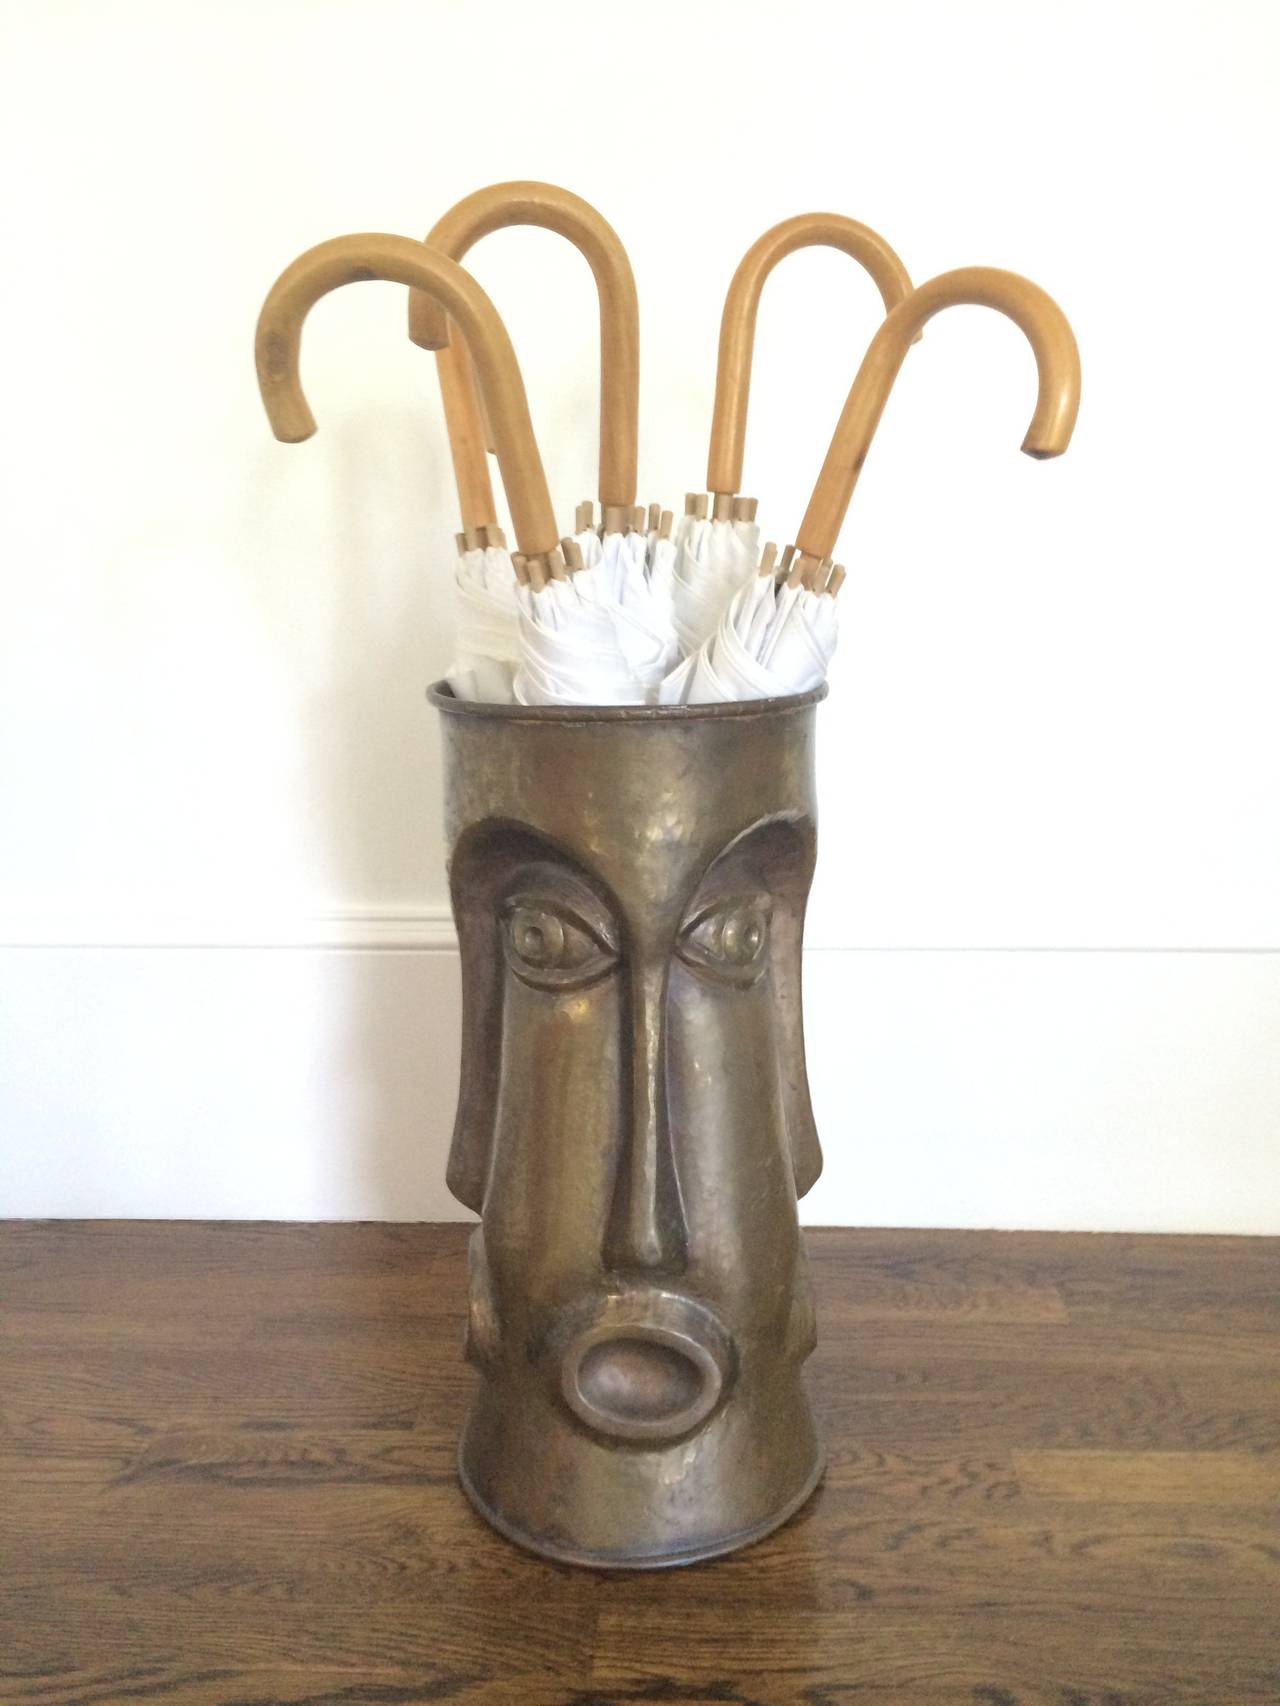 An Italian brass umbrella stand with repeating face motif. Hand hammered seamless cylinder, circa 1960's. Stamped 